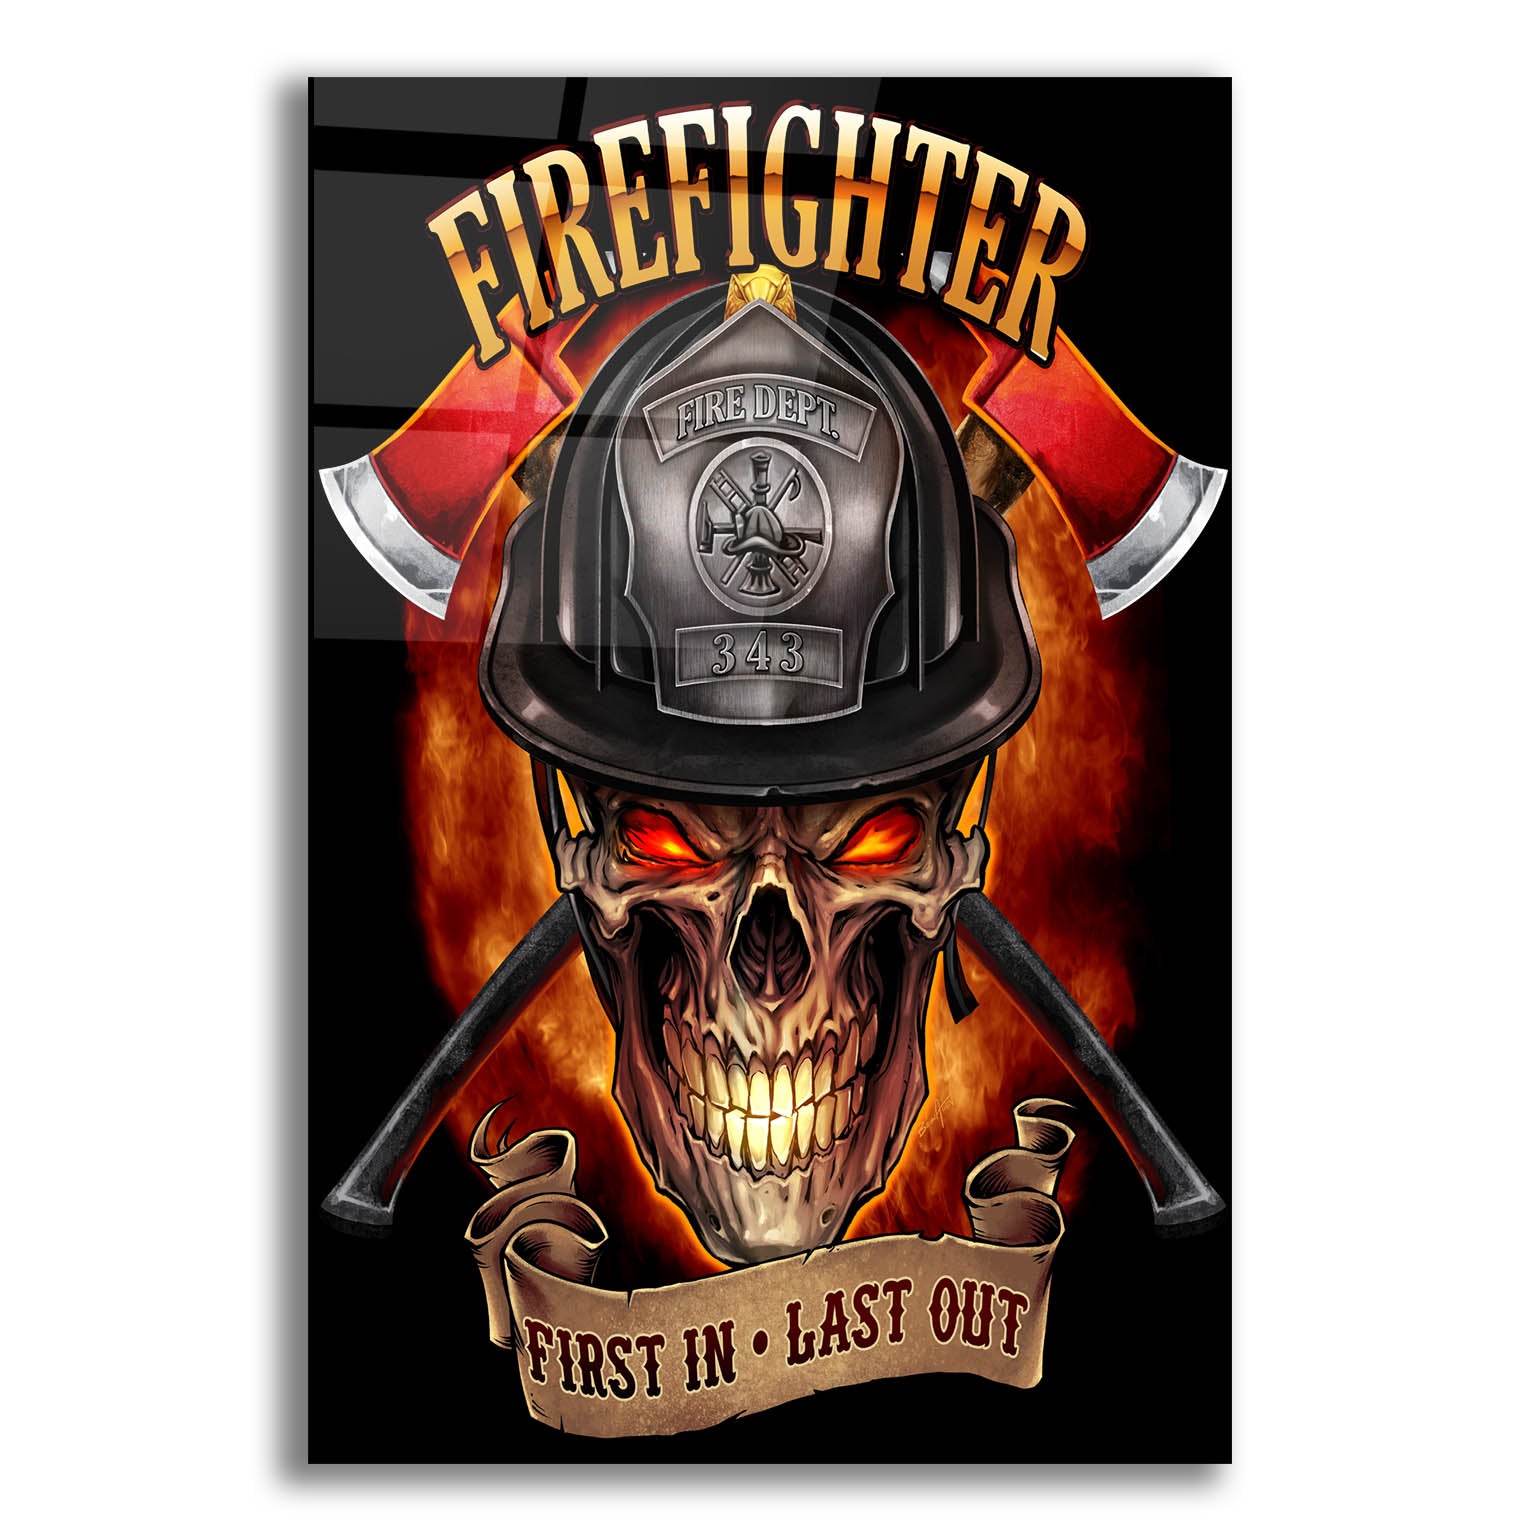 Epic Art 'Fire Fighter Skull' by Flyland Designs, Acrylic Glass Wall Art,12x16